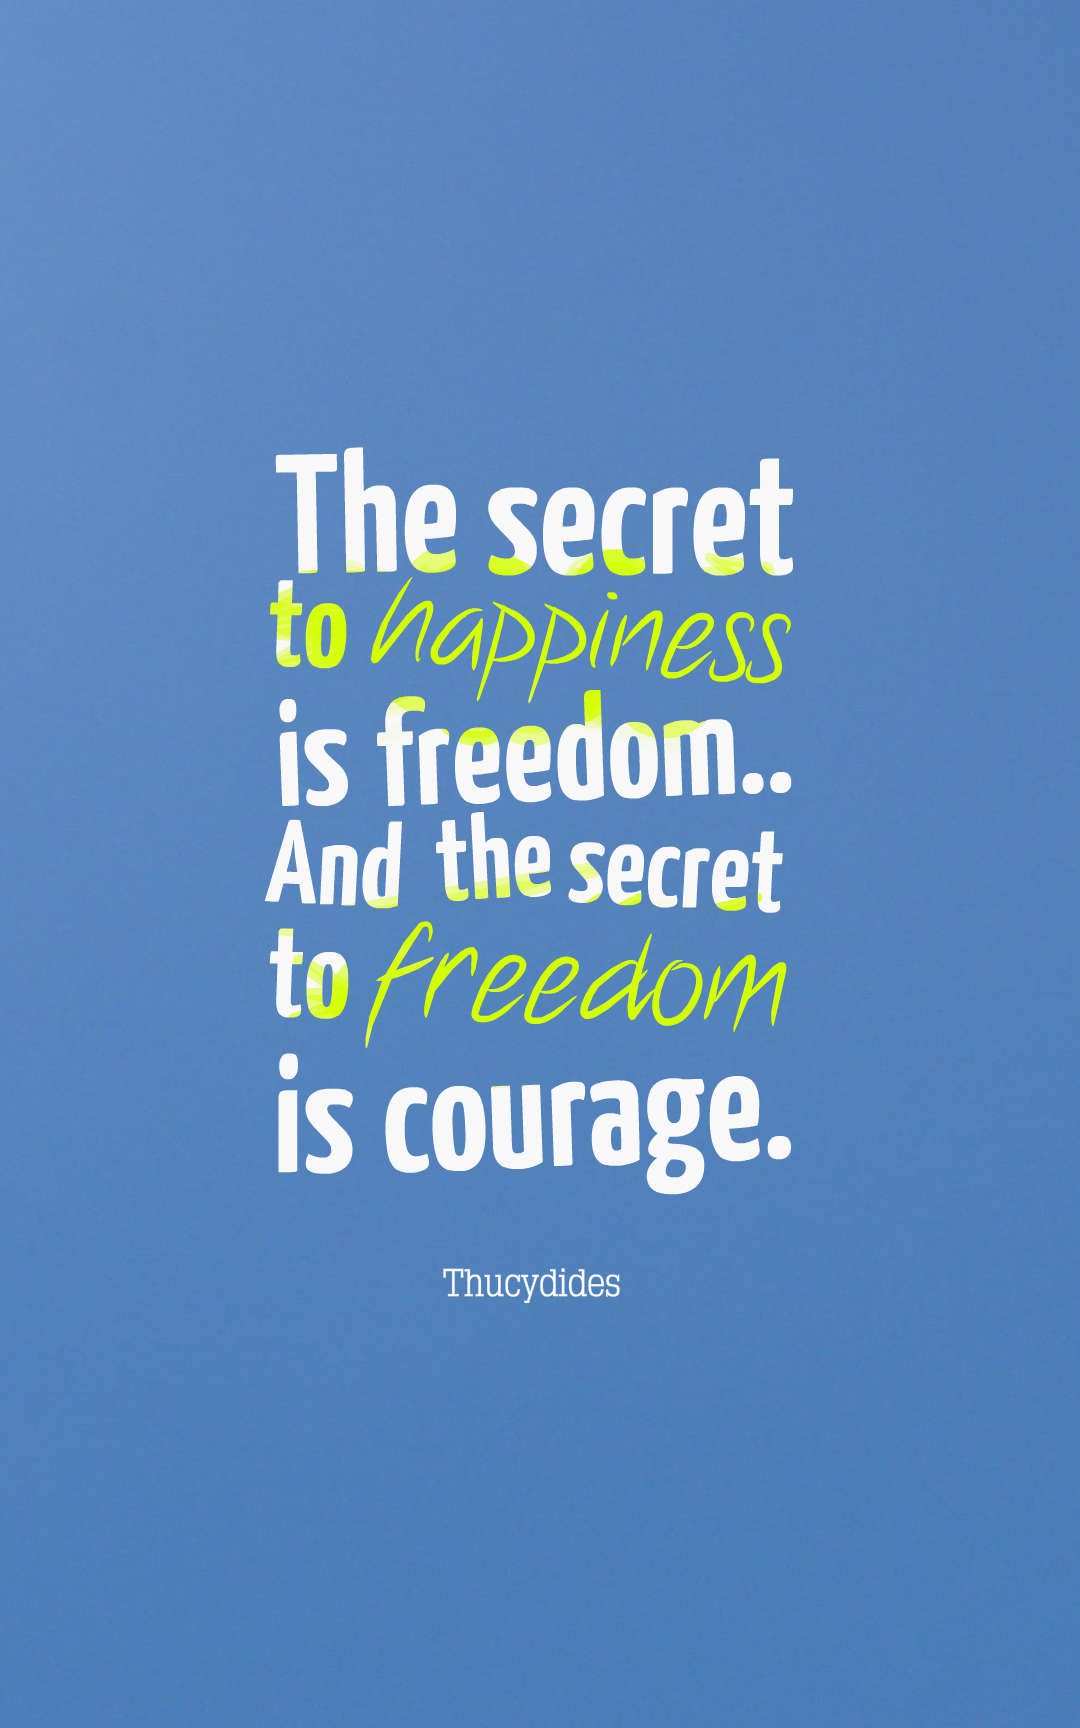 The secret to happiness is freedom.. And the secret to freedom is courage.